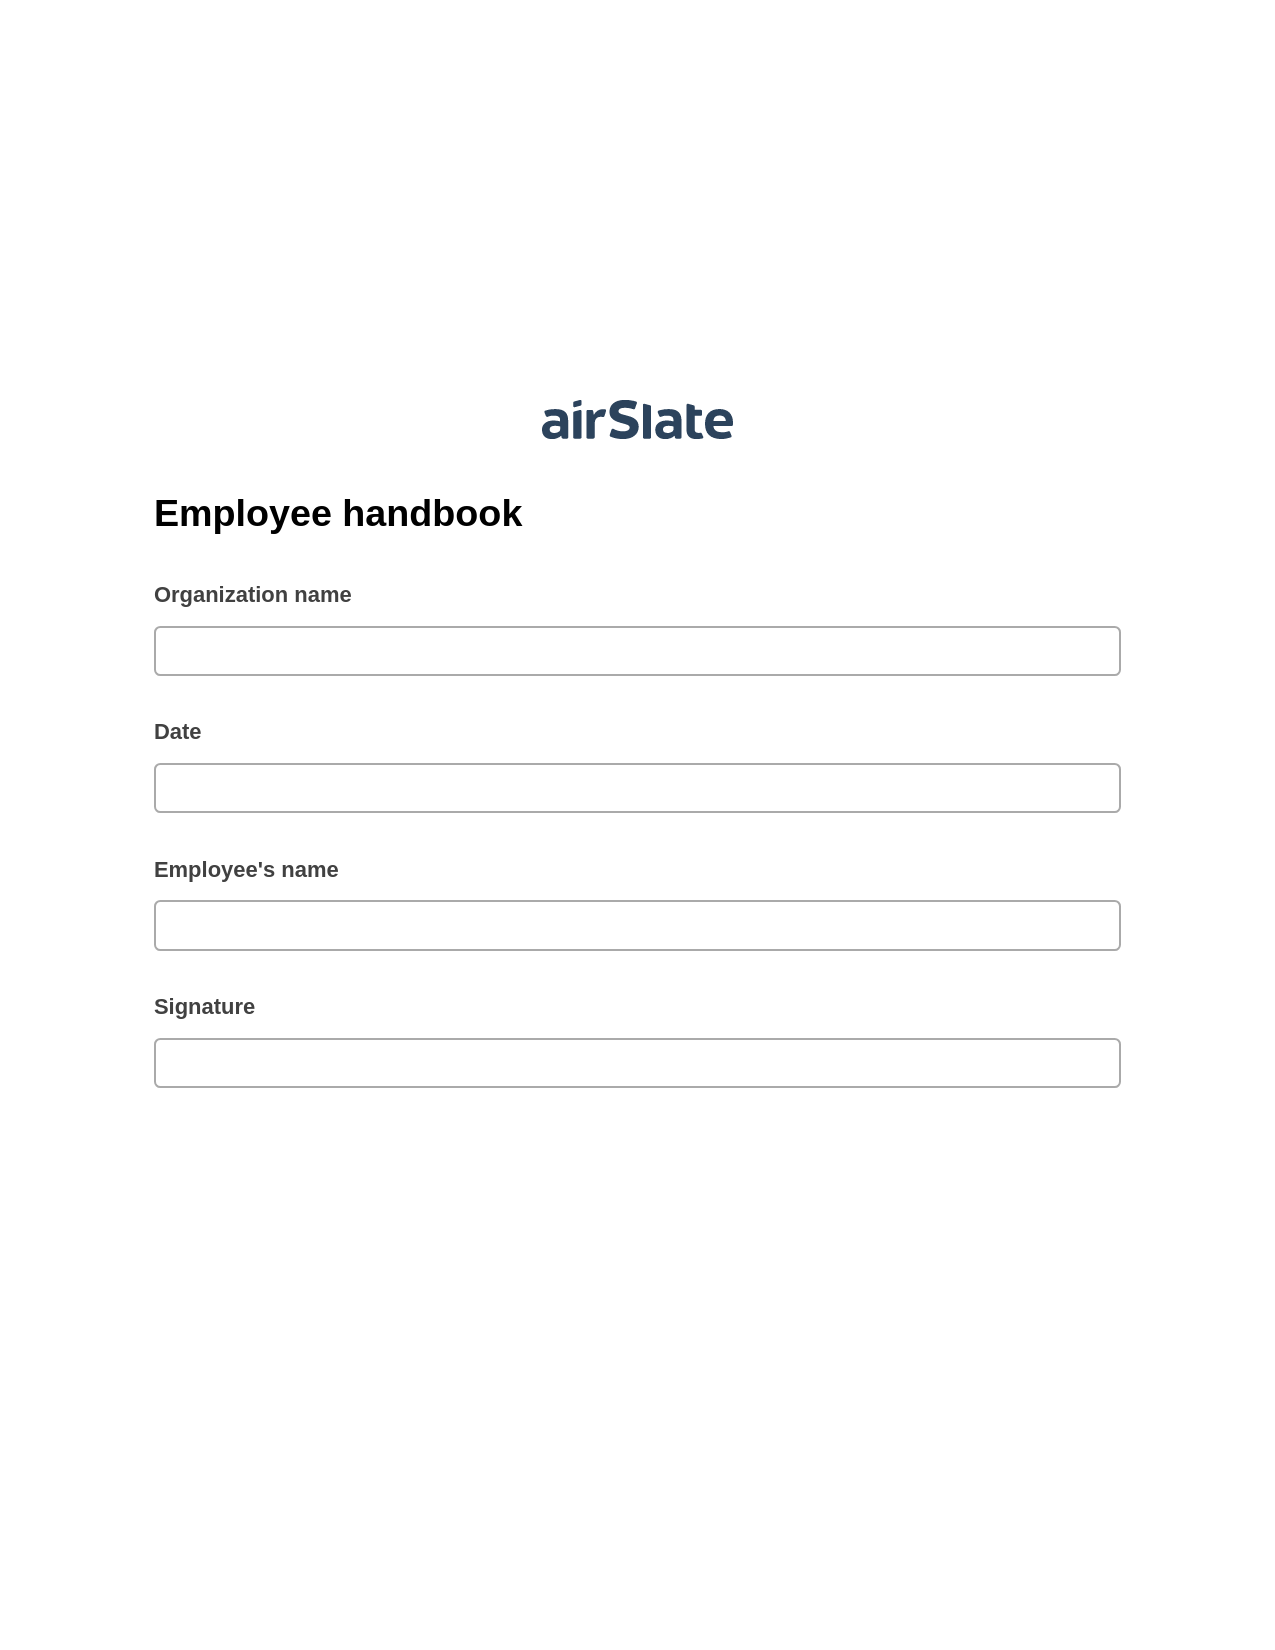 Employee handbook Pre-fill from another Slate Bot, Create NetSuite Records Bot, Export to NetSuite Record Bot